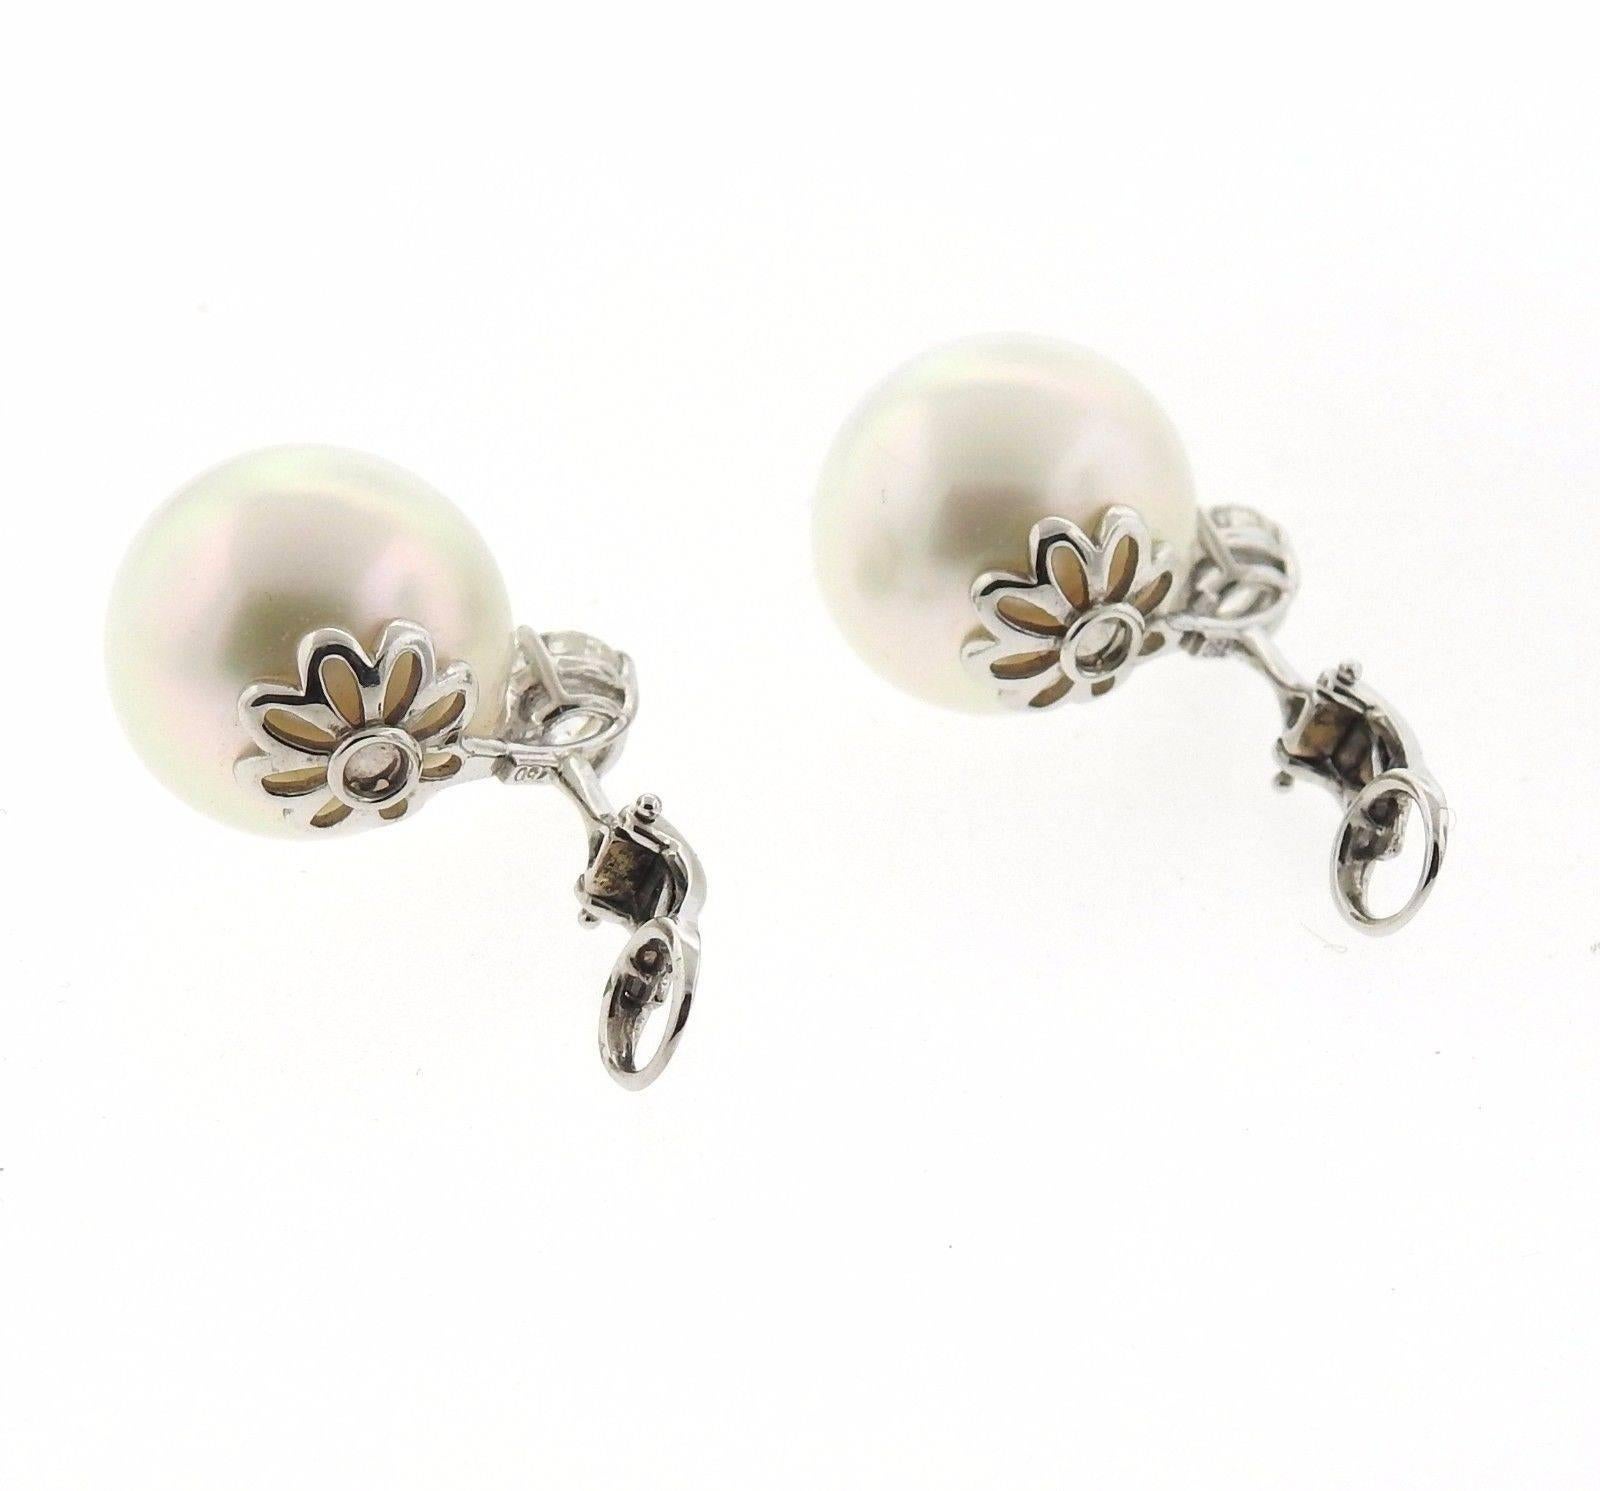 A pair of 18k gold earrings set with 15.5mm South Sea pearls and 1.60ctw of H-I/SI diamonds.  The earrings measure 21mm long and weigh 15.4 grams.